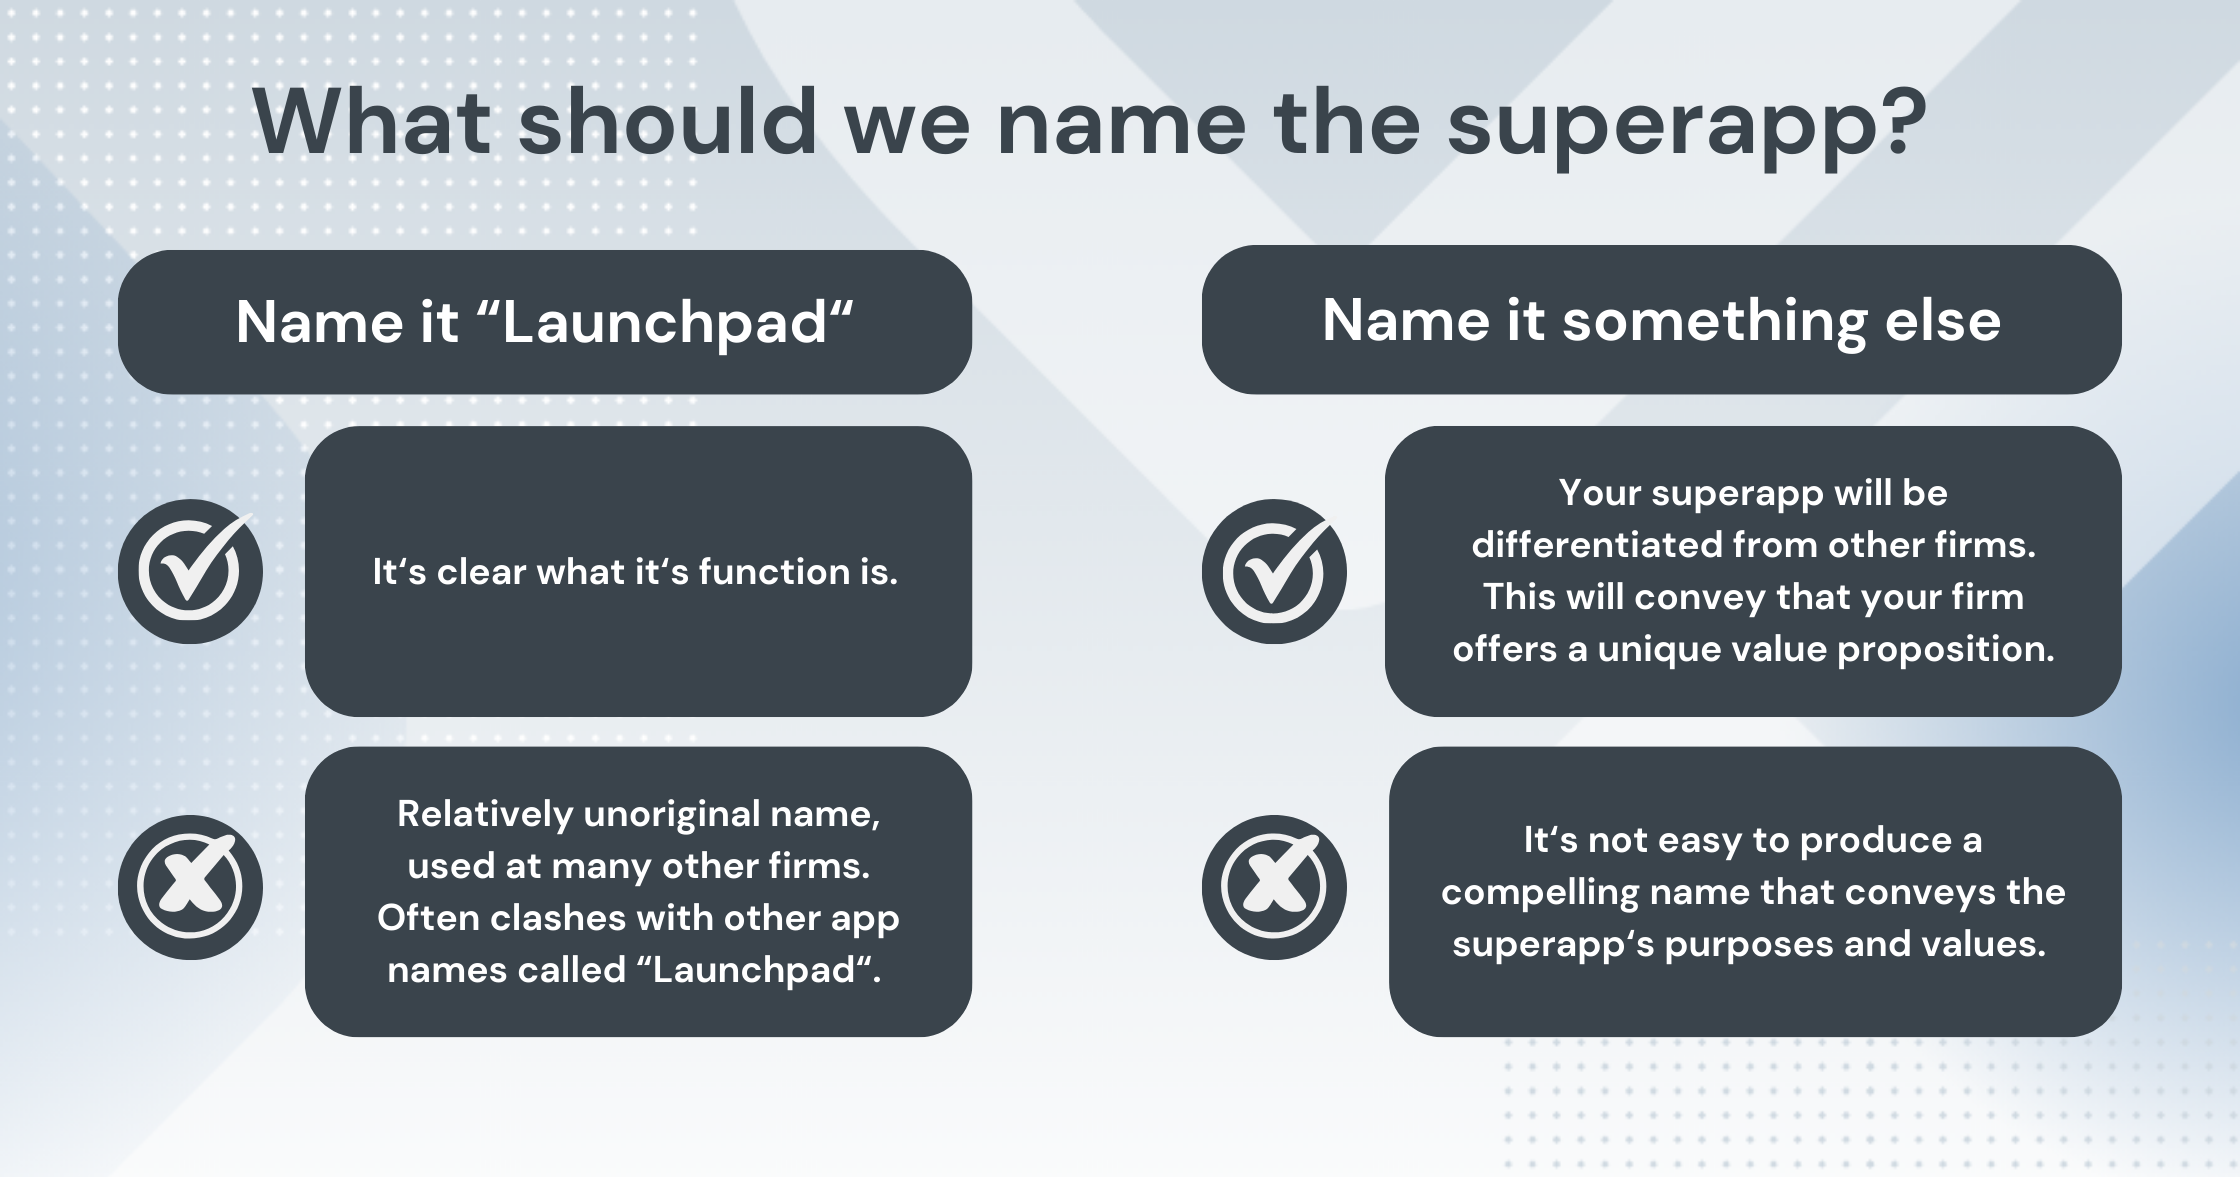 What should we name the super app?